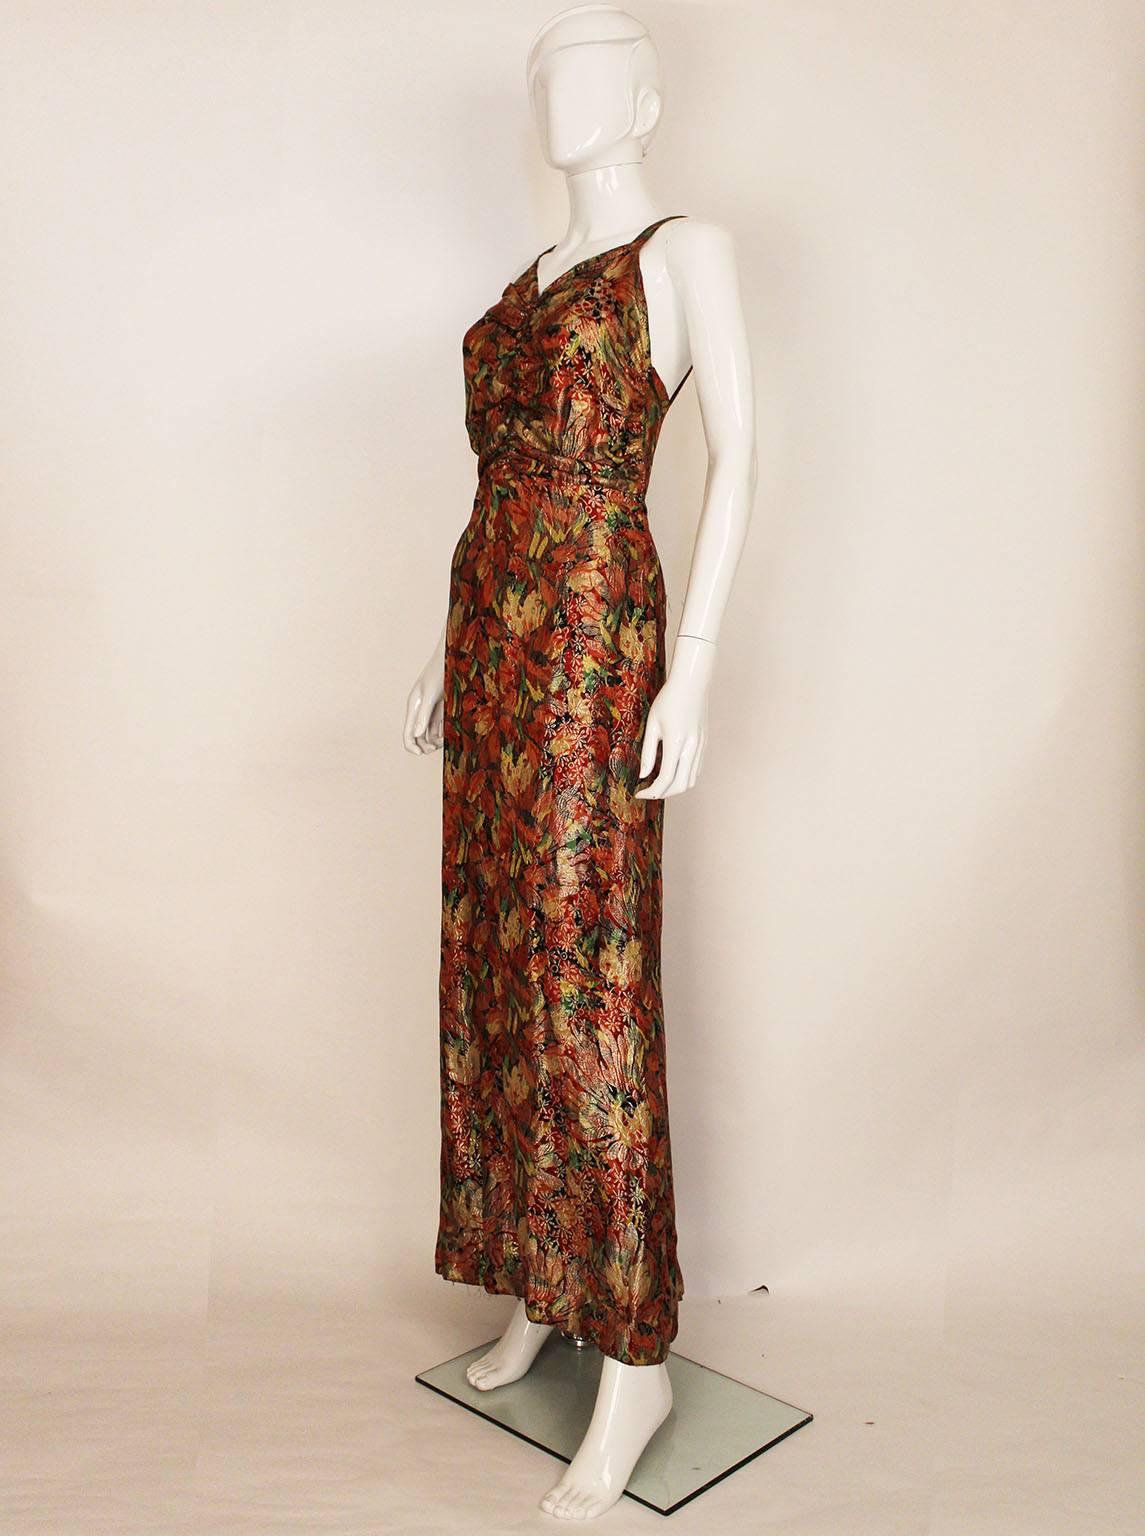 A wonderful head turner,this 1930s gown is colourful and chic.
The colours are a wonderful mix of reds, yellow, green ,gold and black.
The dress has shoulder straps, gathering in the bust, a scoop back,
 and  a central panel at the back that